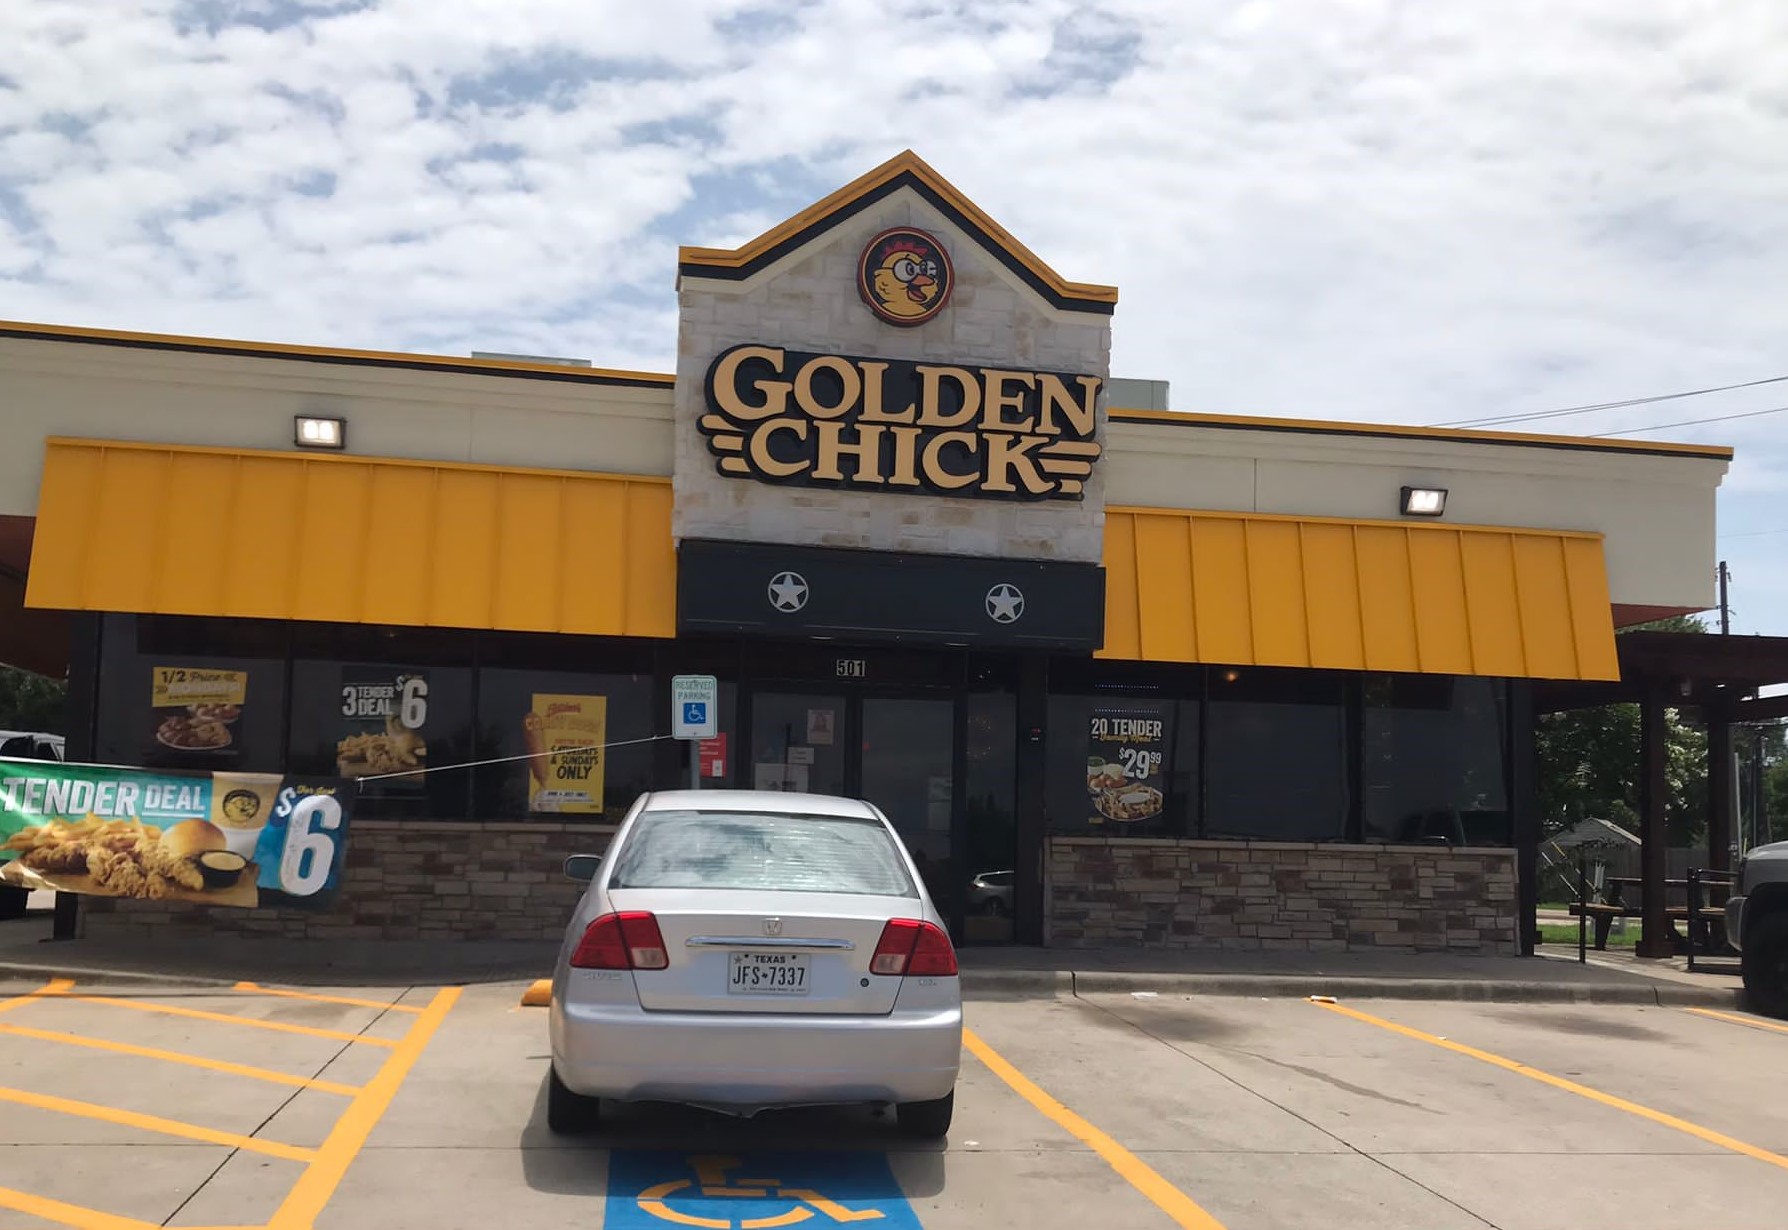 Golden Chick storefront.  Your local Golden Chick fast food restaurant in Wylie, Texas